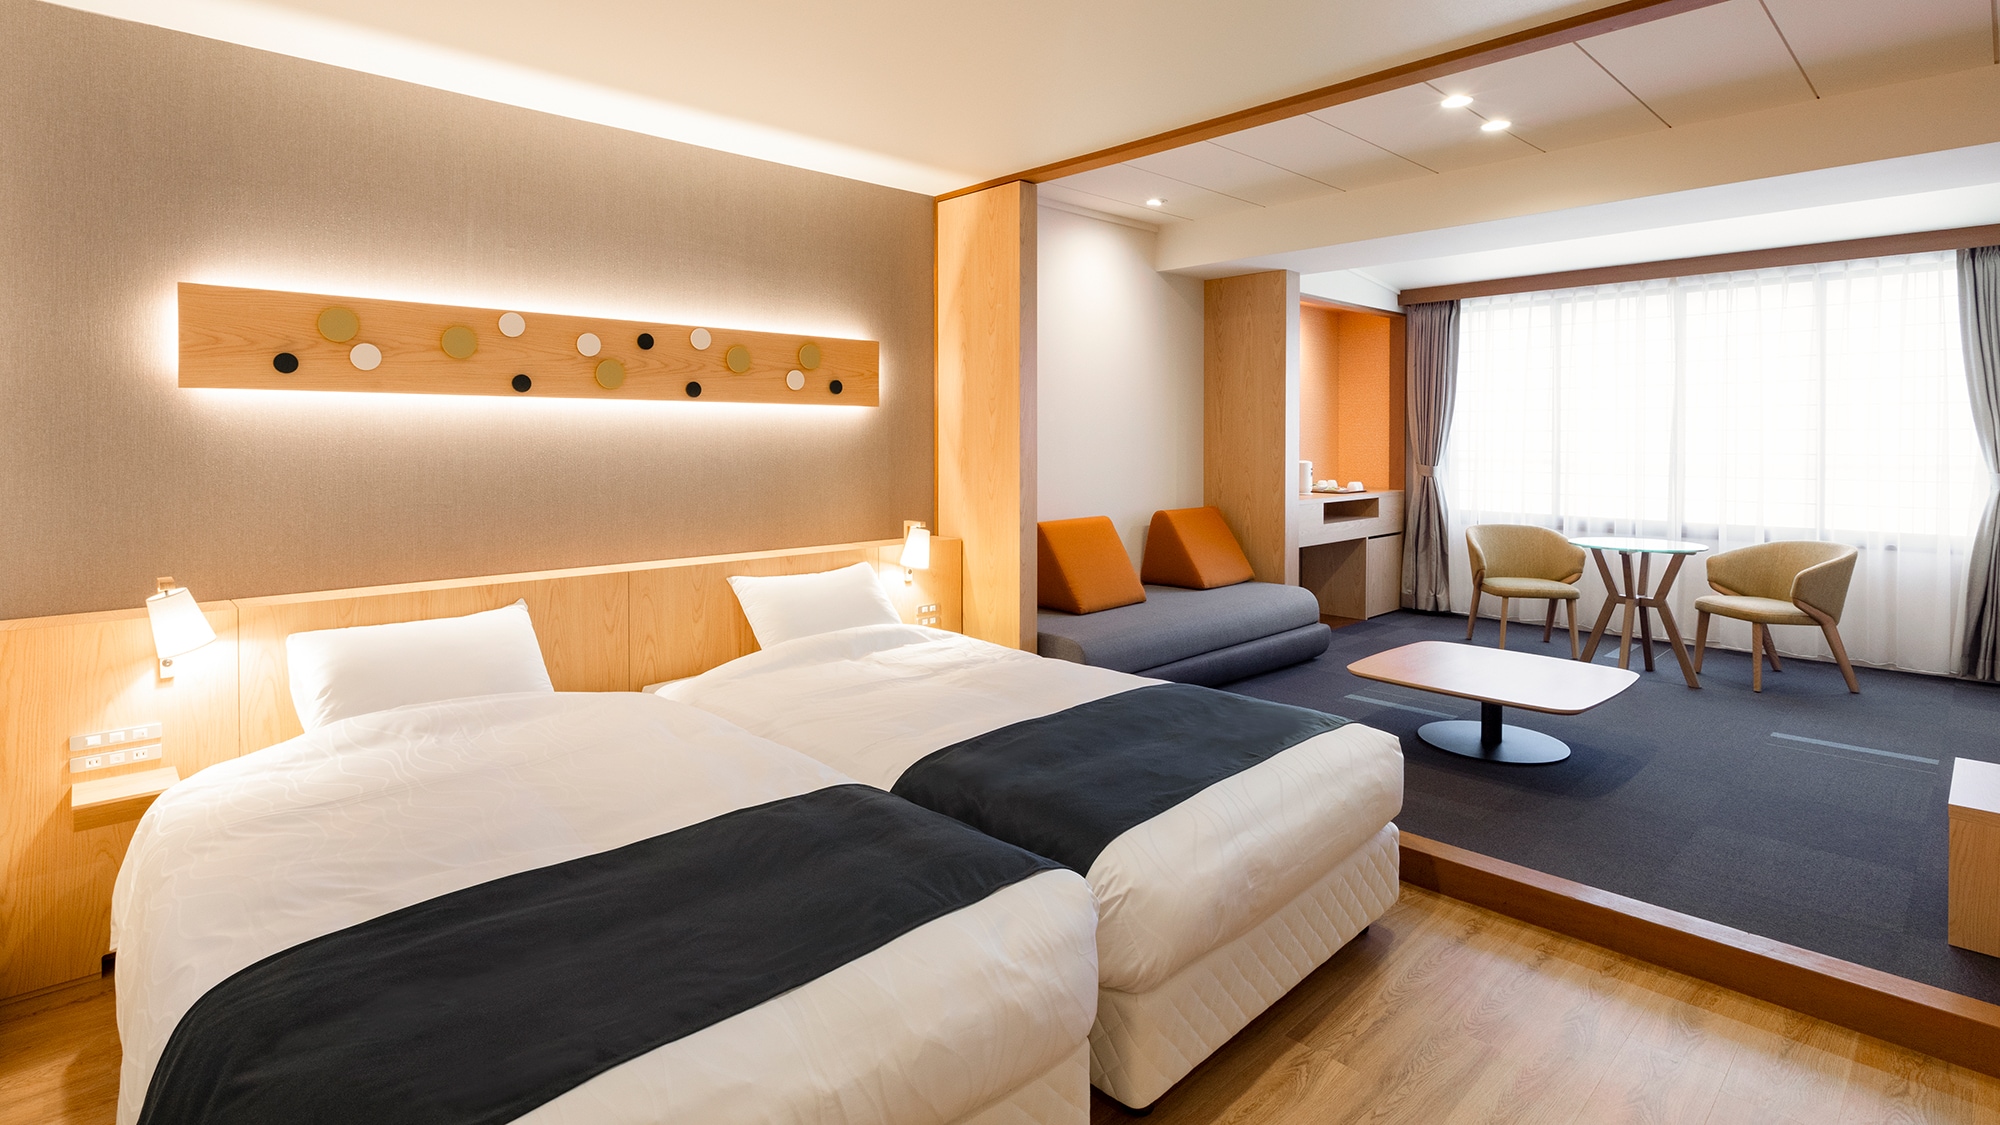 [Standard Twin] The beds in the guest rooms are Hollywood twin type.